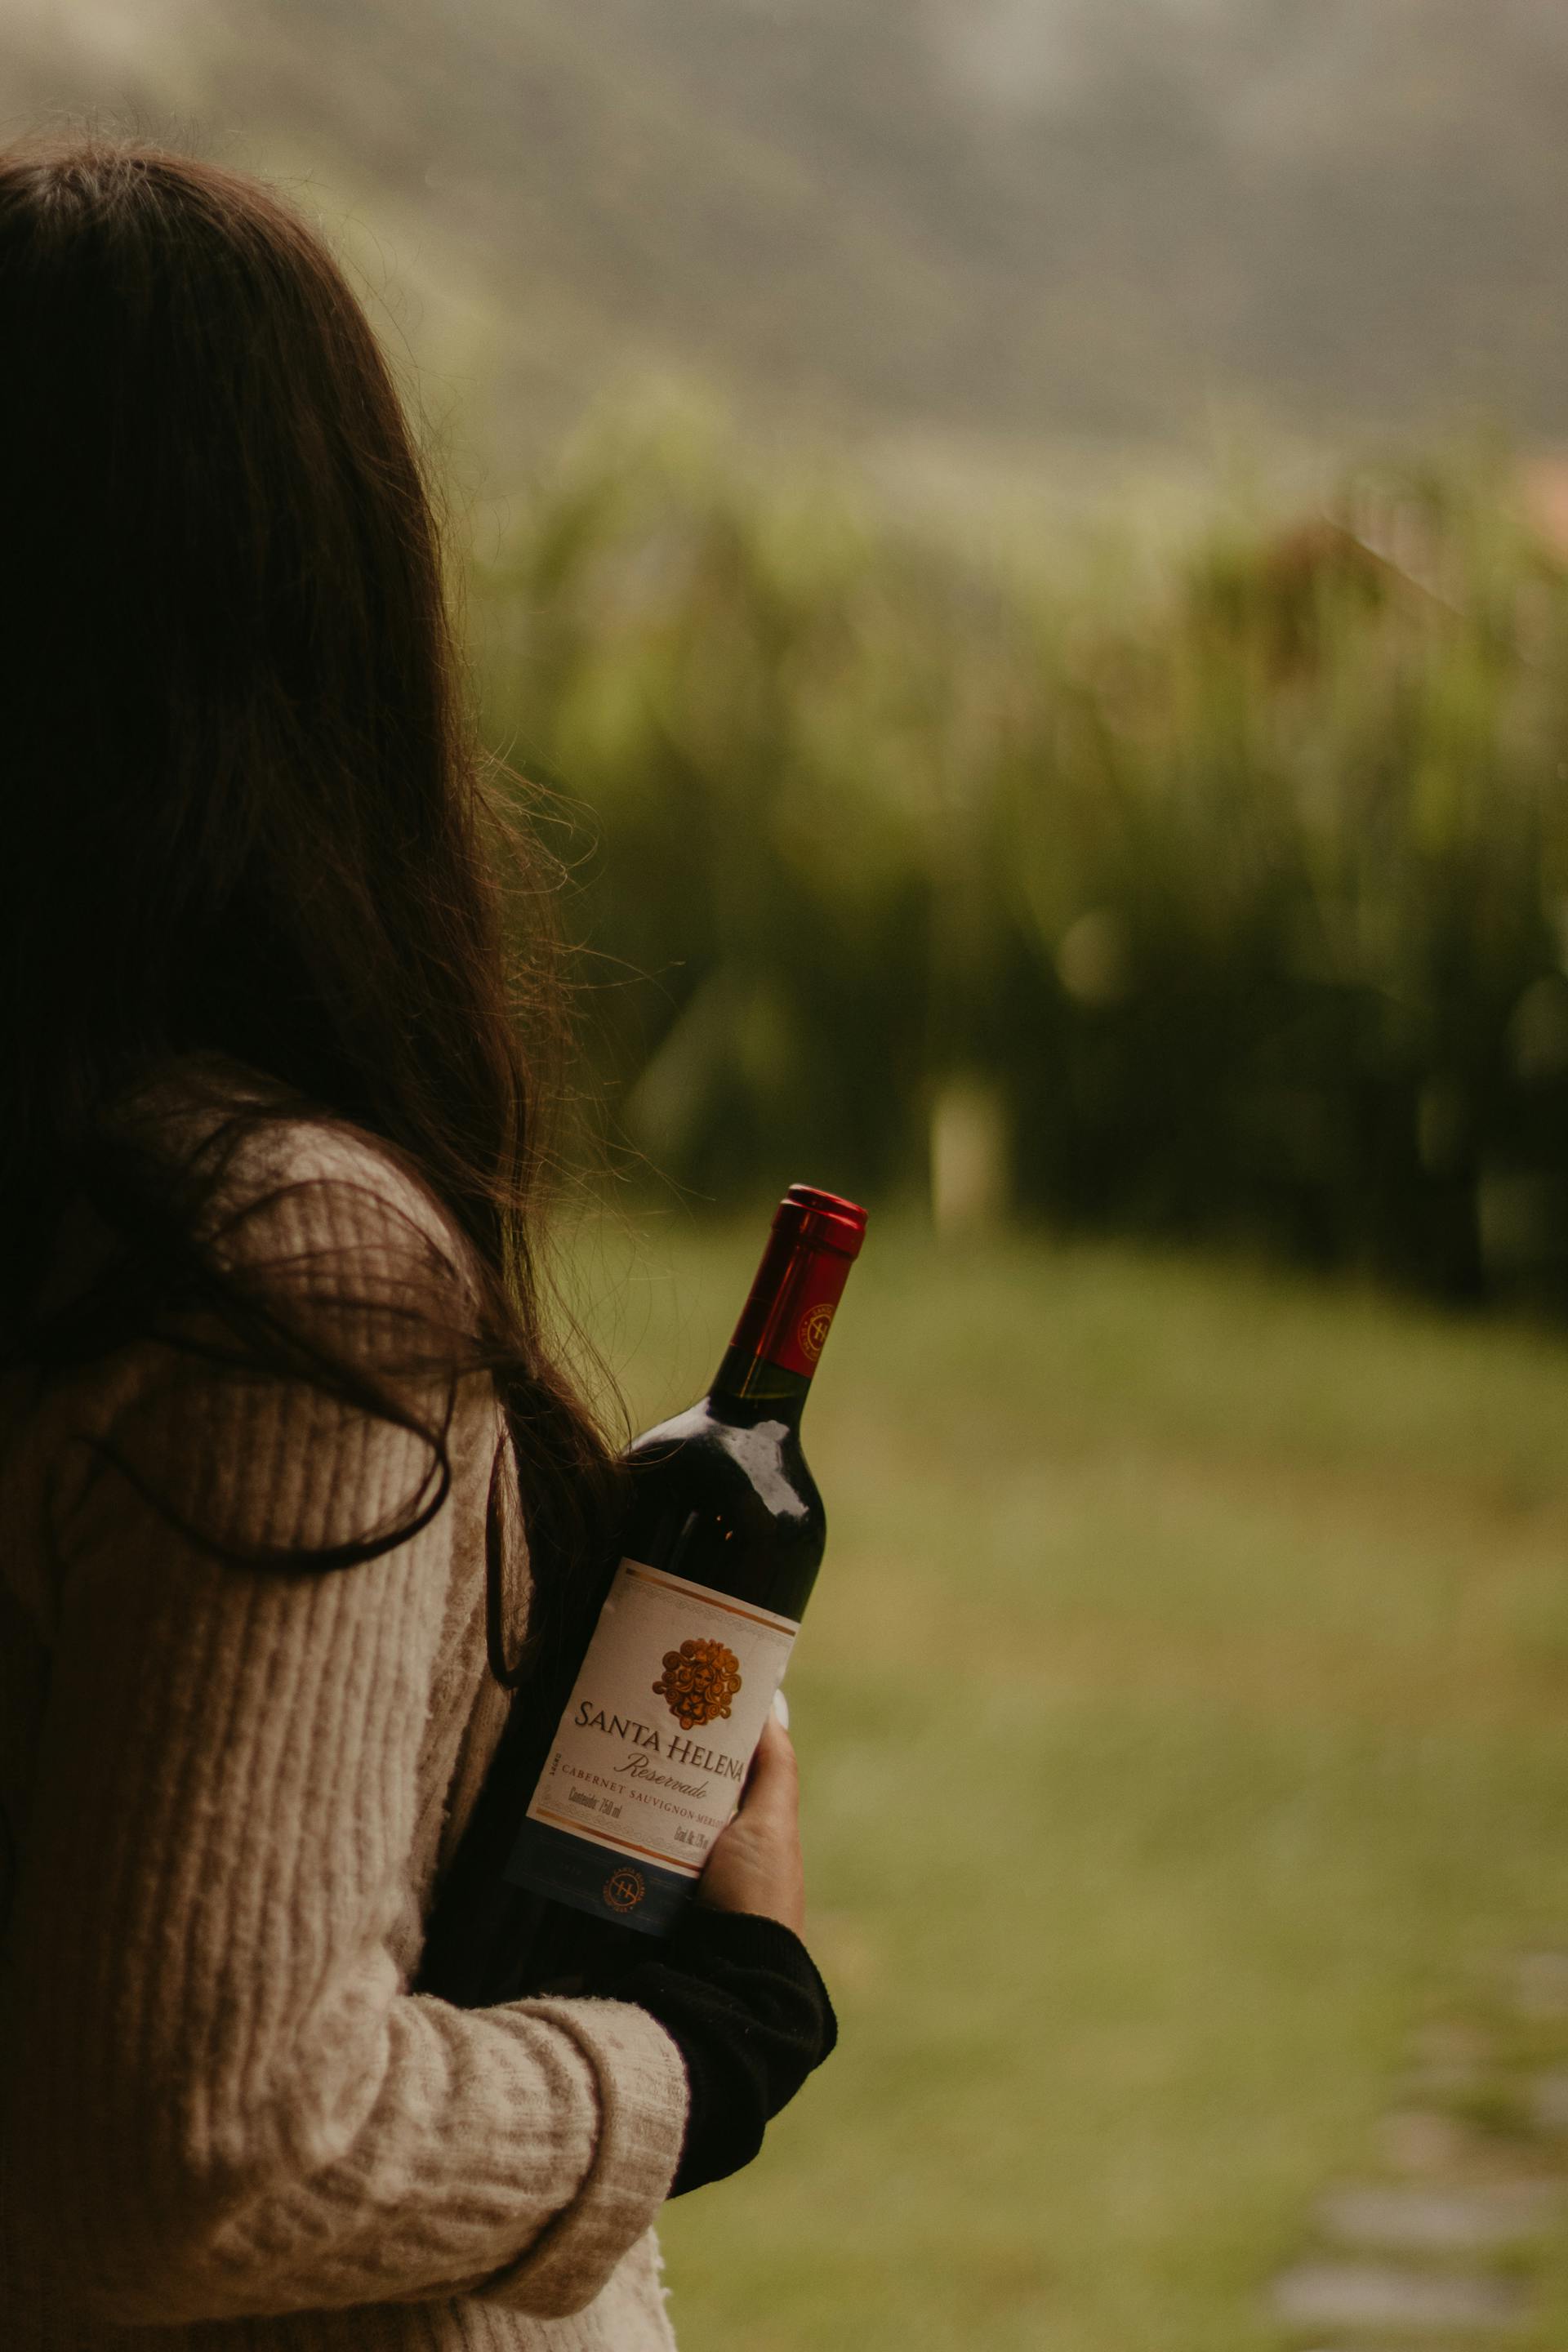 A woman holding a bottle of wine | Source: Pexels